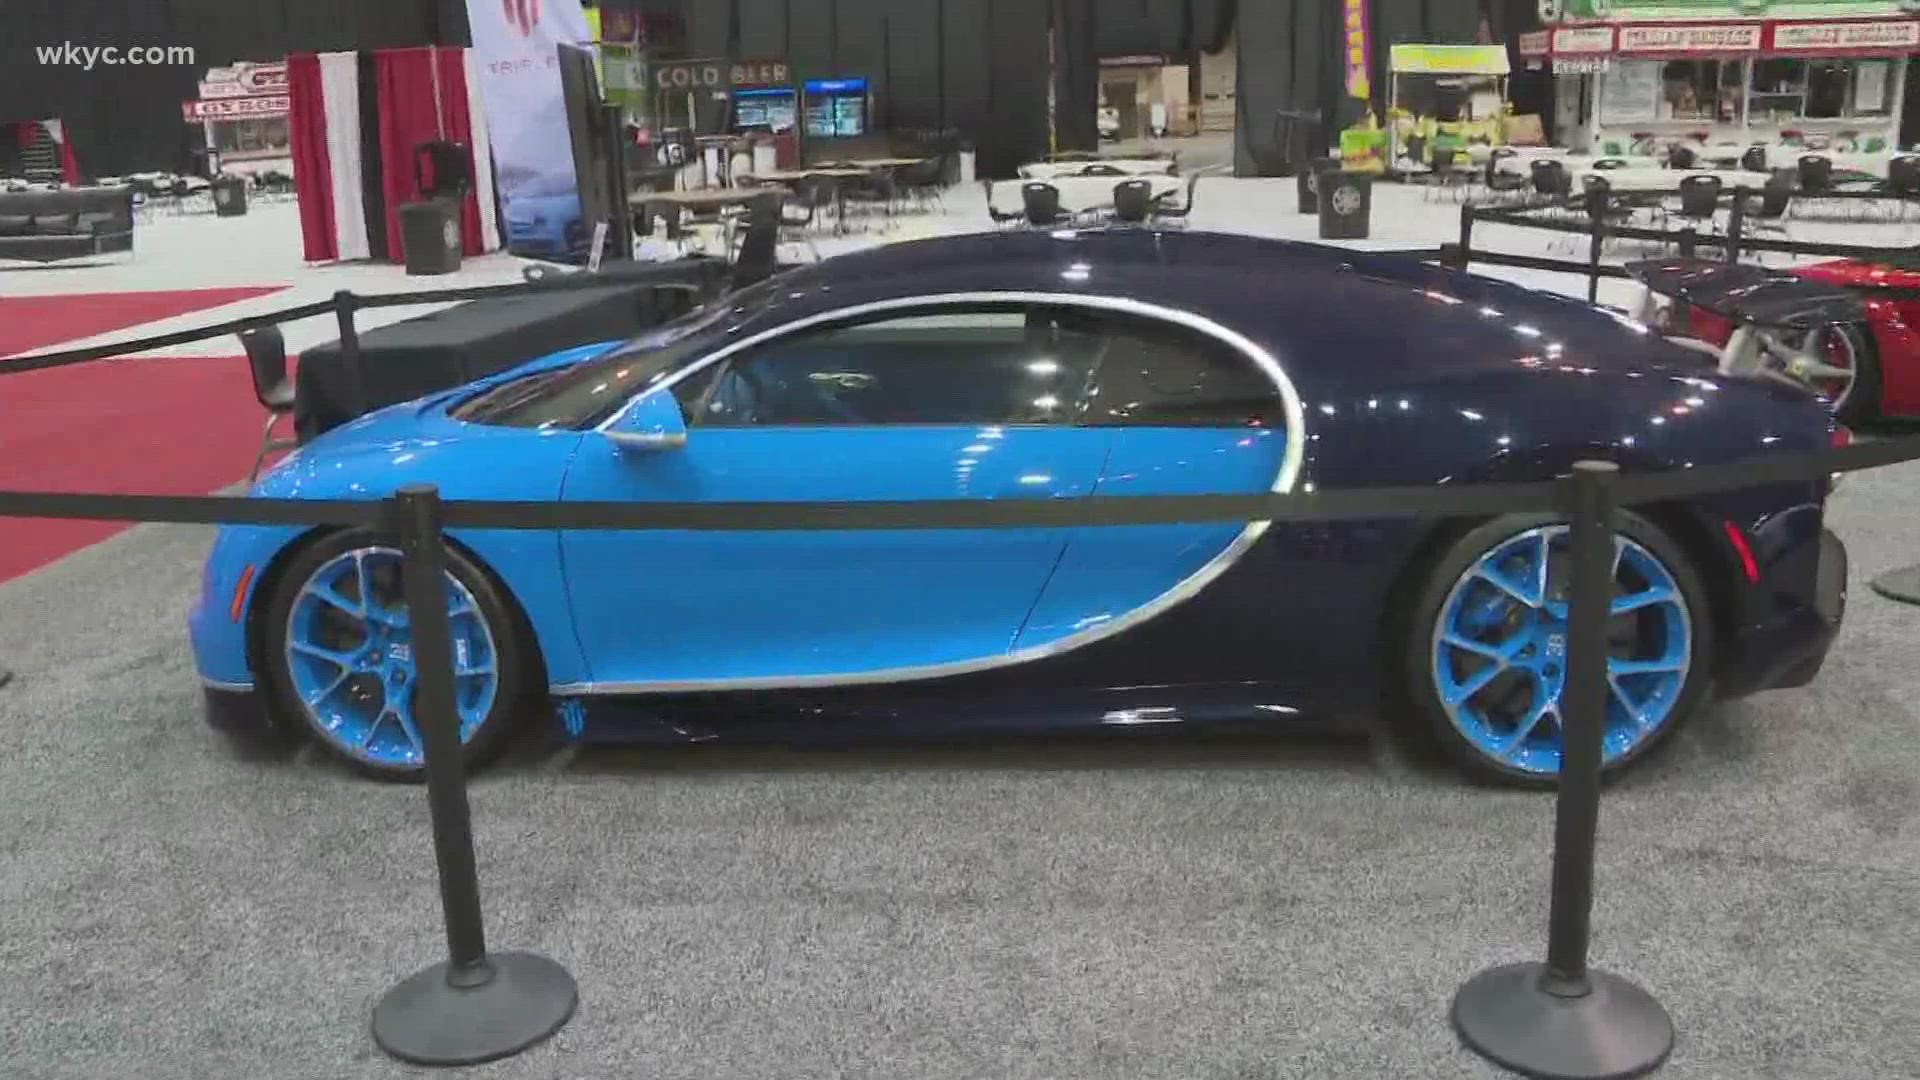 The 2022 Cleveland Auto Show is underway at the I-X Center. 3News' Jasmine Monroe was given a special look at some of the exotic vehicles on display this year.